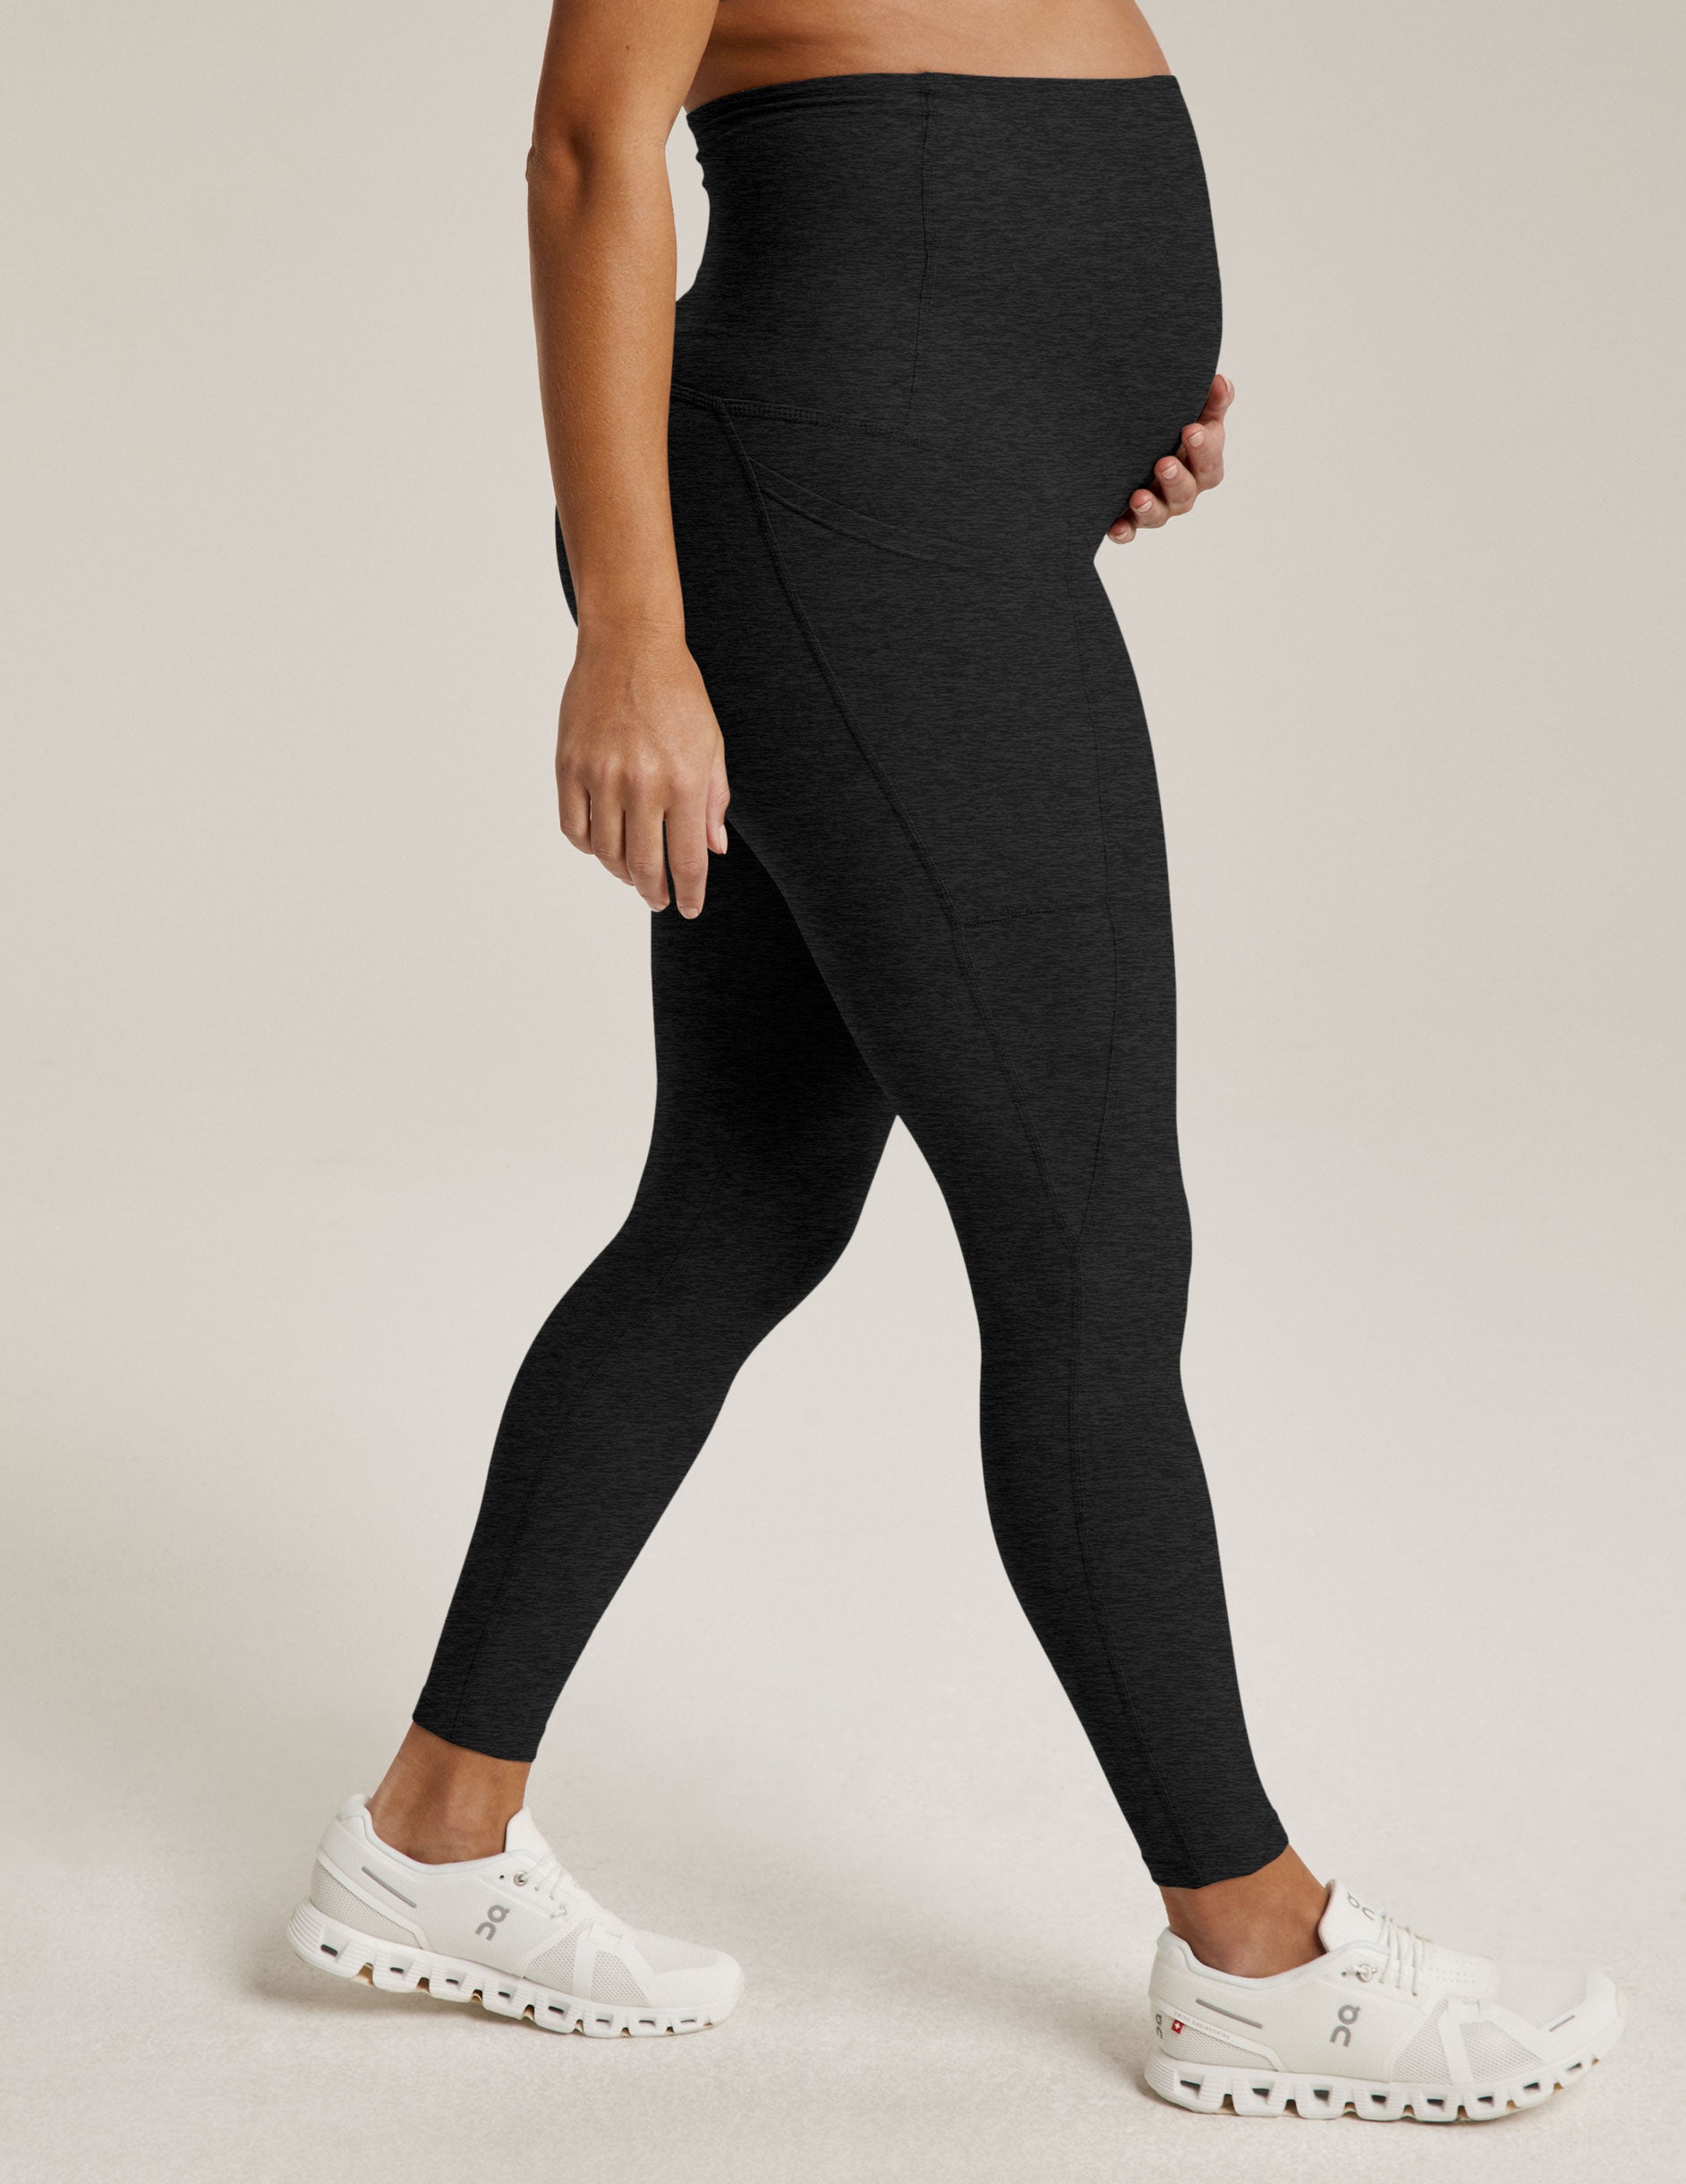 Best Maternity Clothing Brands Available in Australia | Queen Bee